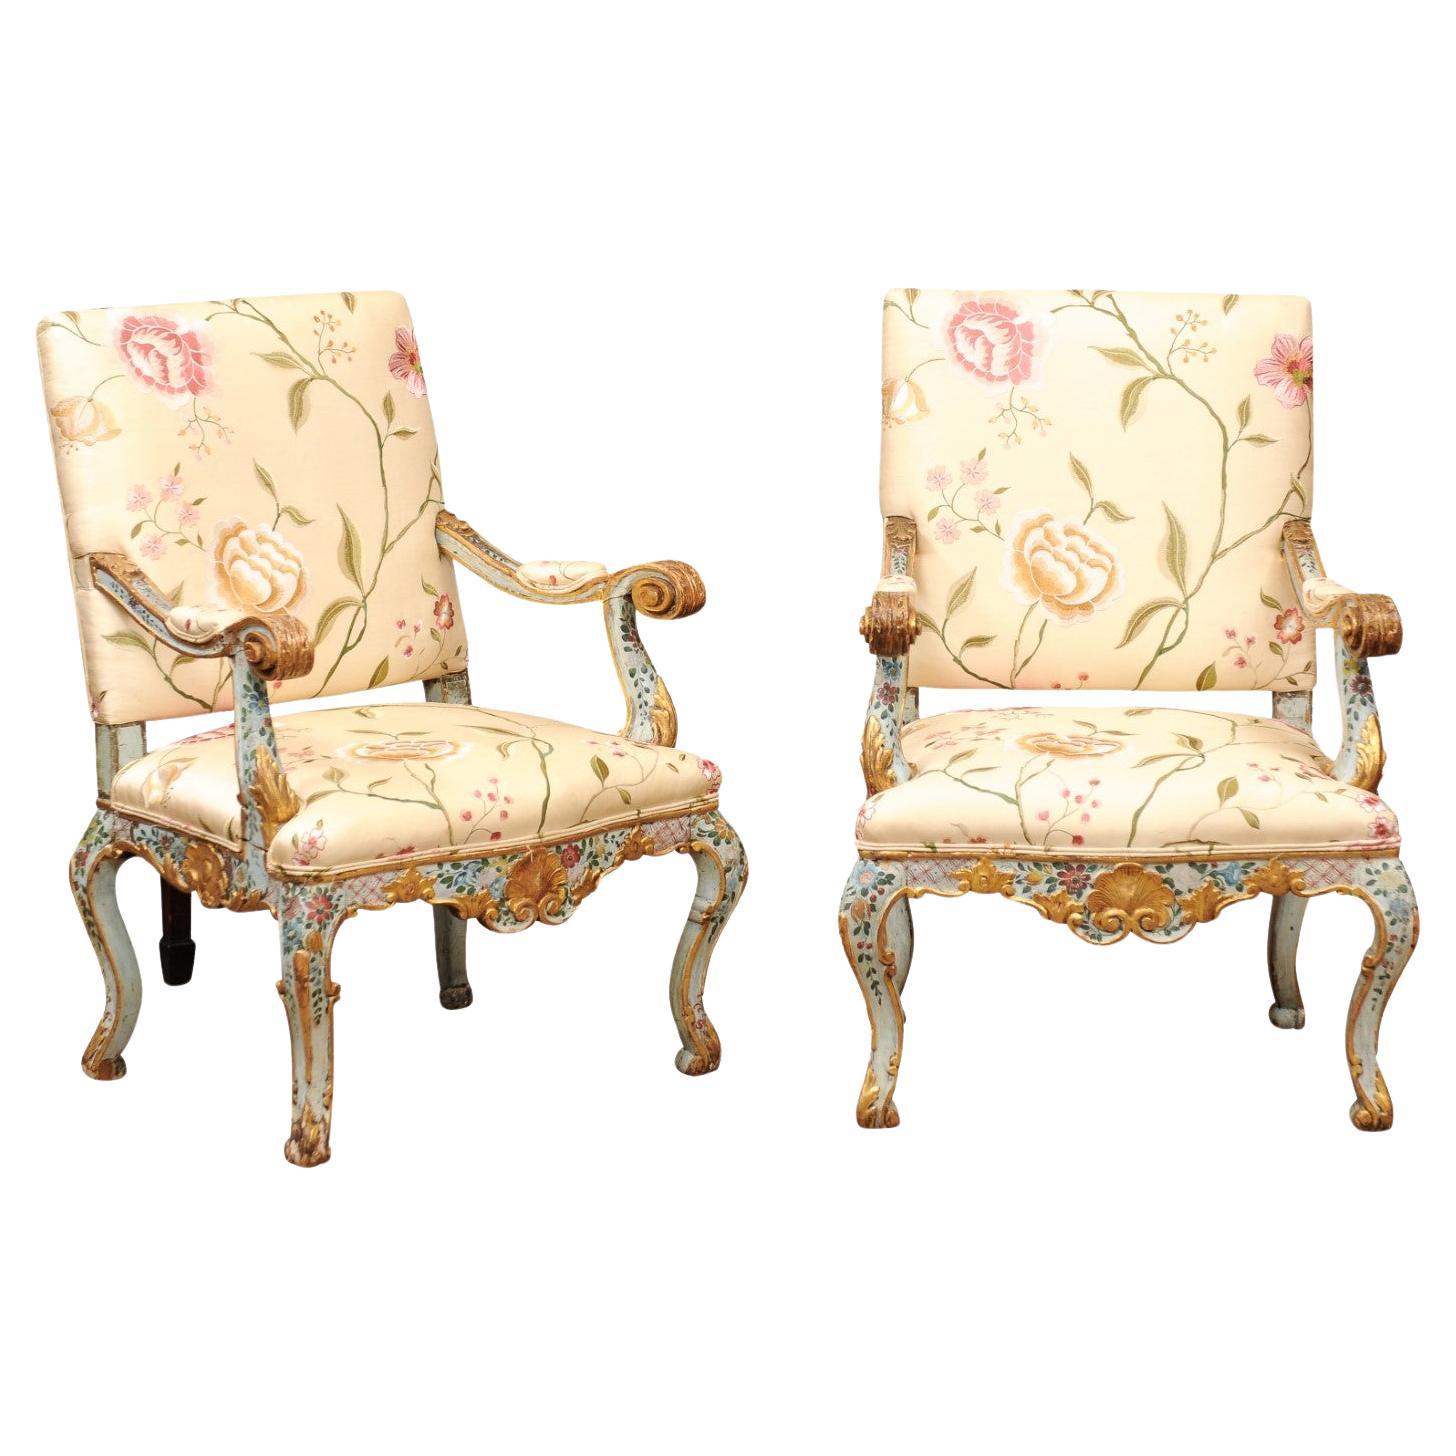 Pair of Venetian Blue Floral & Gilt Painted Armchairs Silk Upholstery For Sale